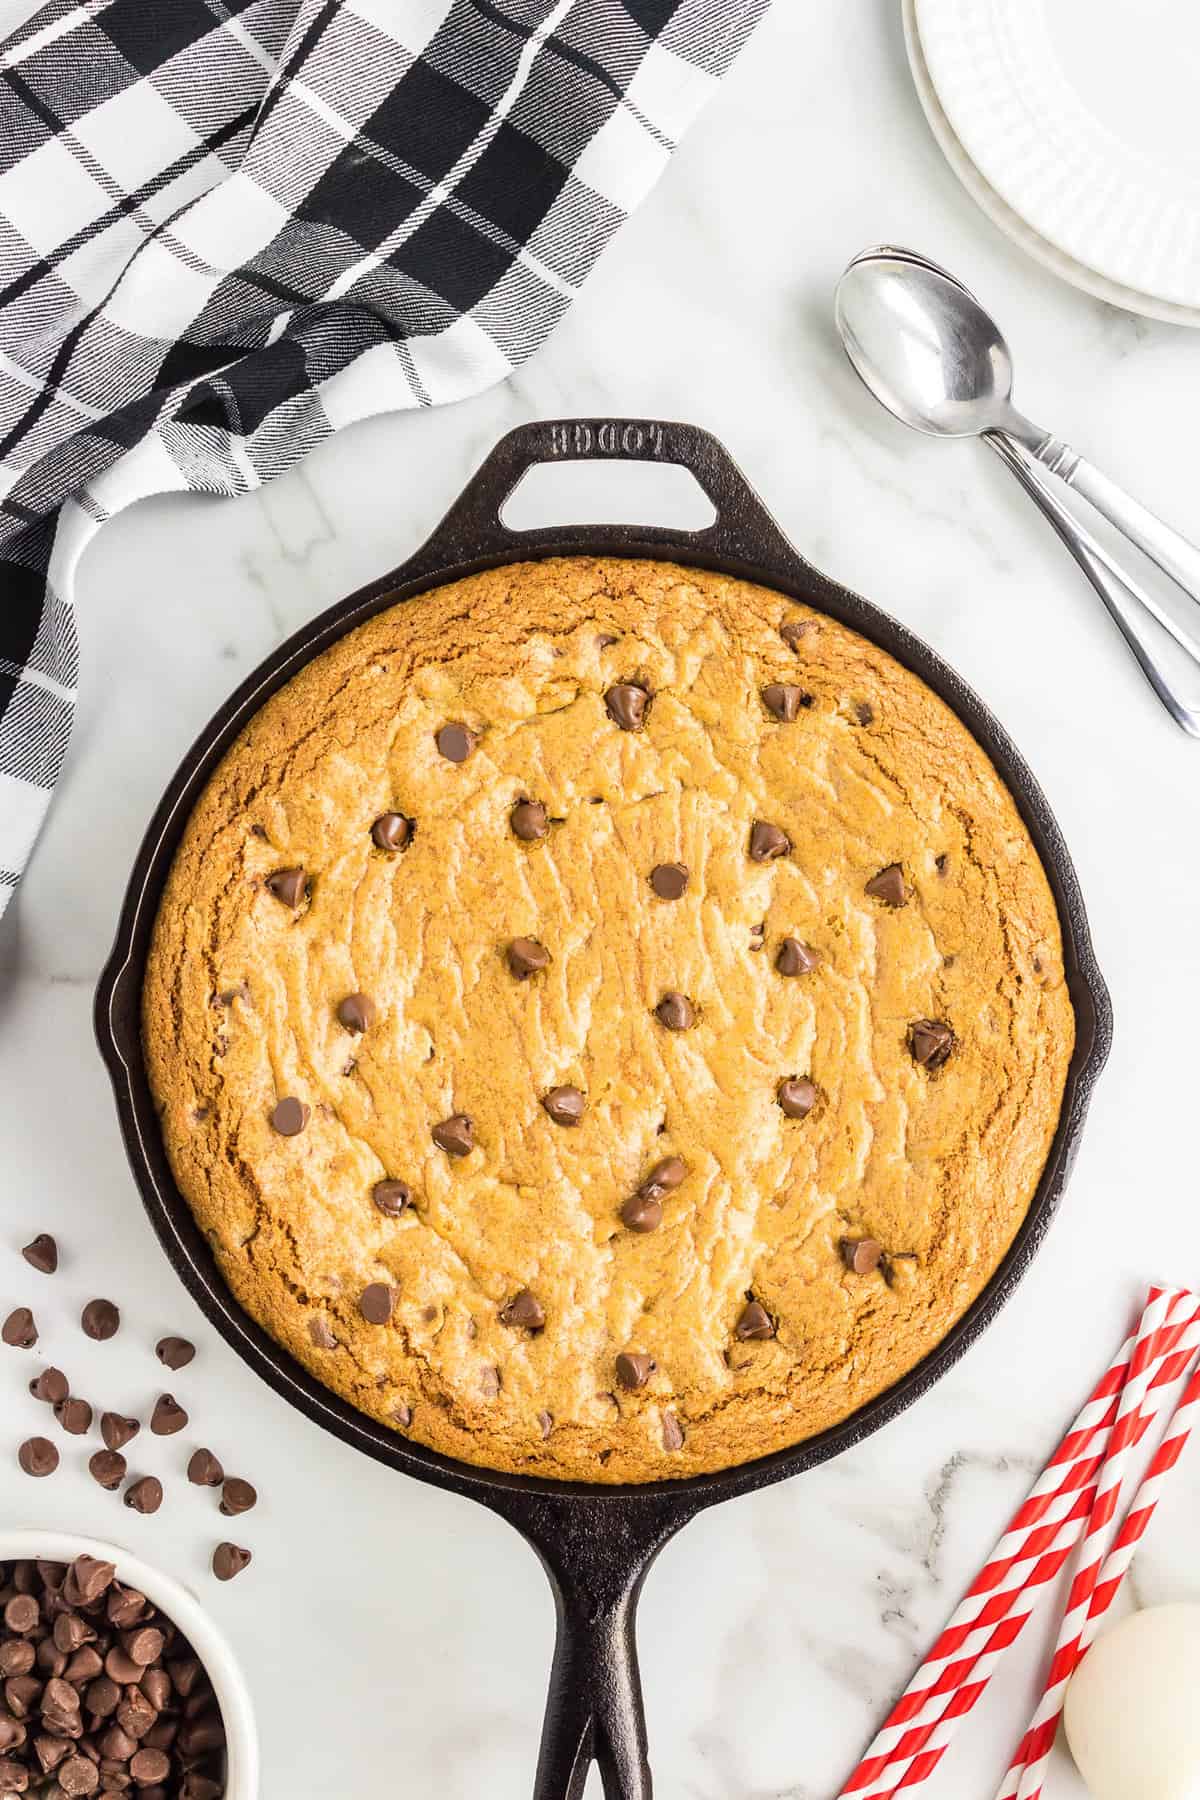 Cast Iron Cookie Recipe in Skillet Just Out of the Oven